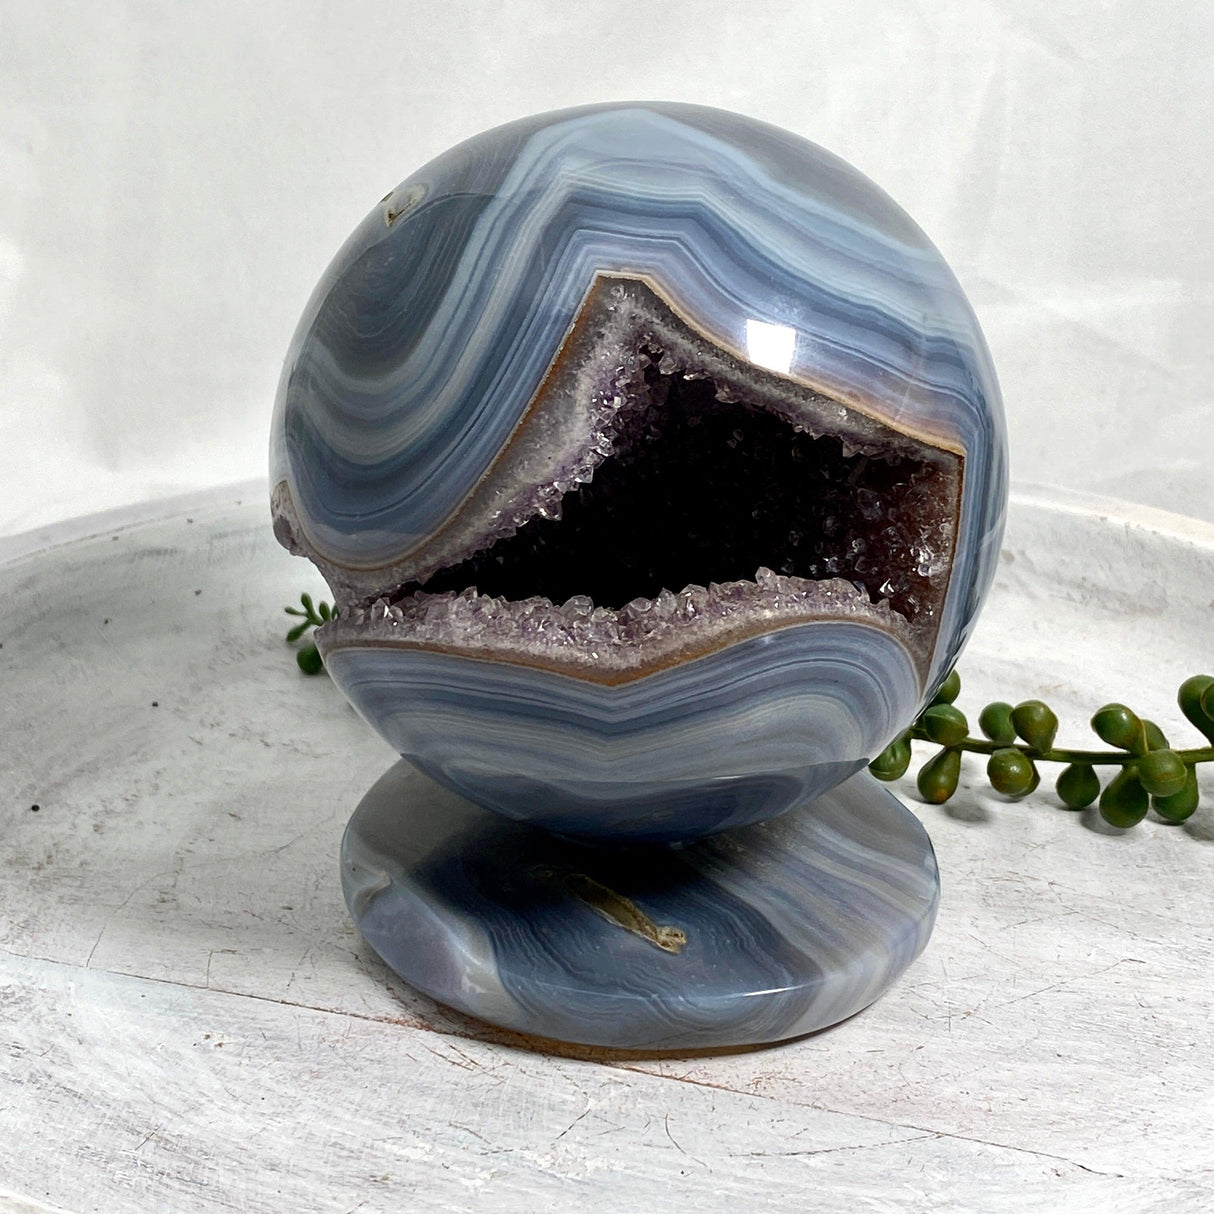 Agate druzy sphere AGS-01 - Nature's Magick